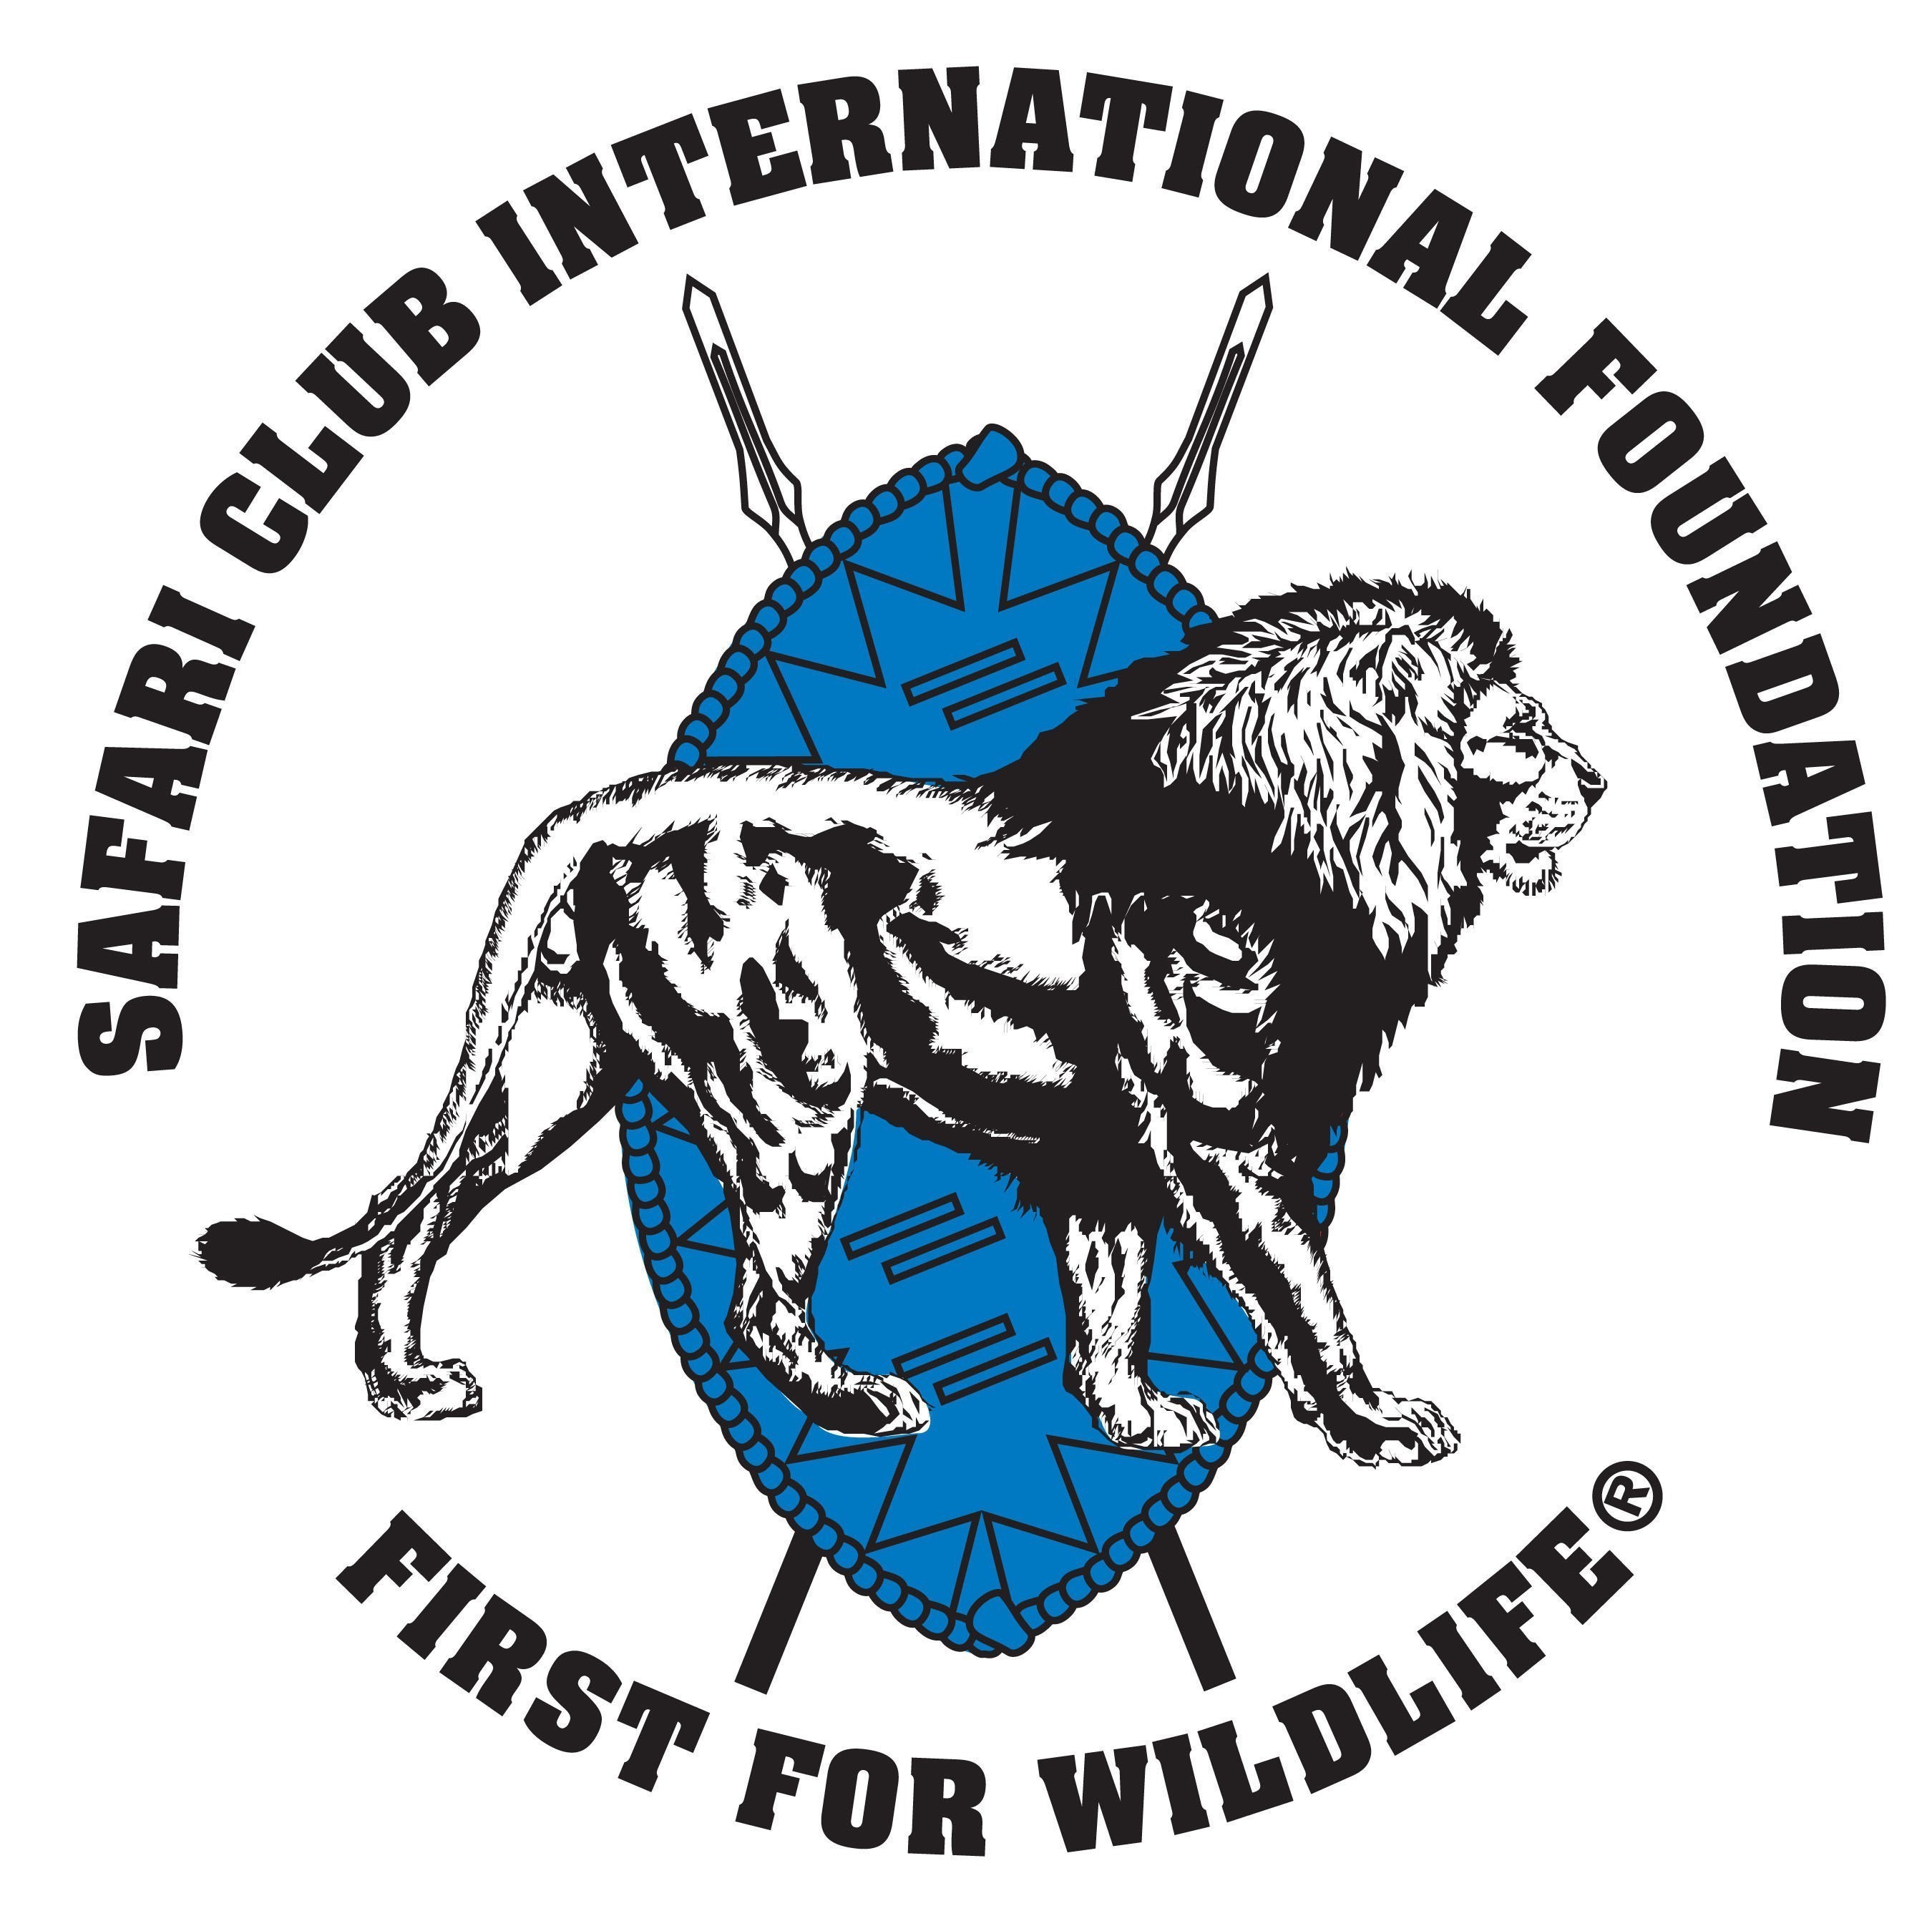 SCI Foundation is a 501(c)(3) charitable organization that funds and manages worldwide programs dedicated to wildlife conservation, outdoor education, and humanitarian services. (PRNewsFoto/Safari Club International Foundation)